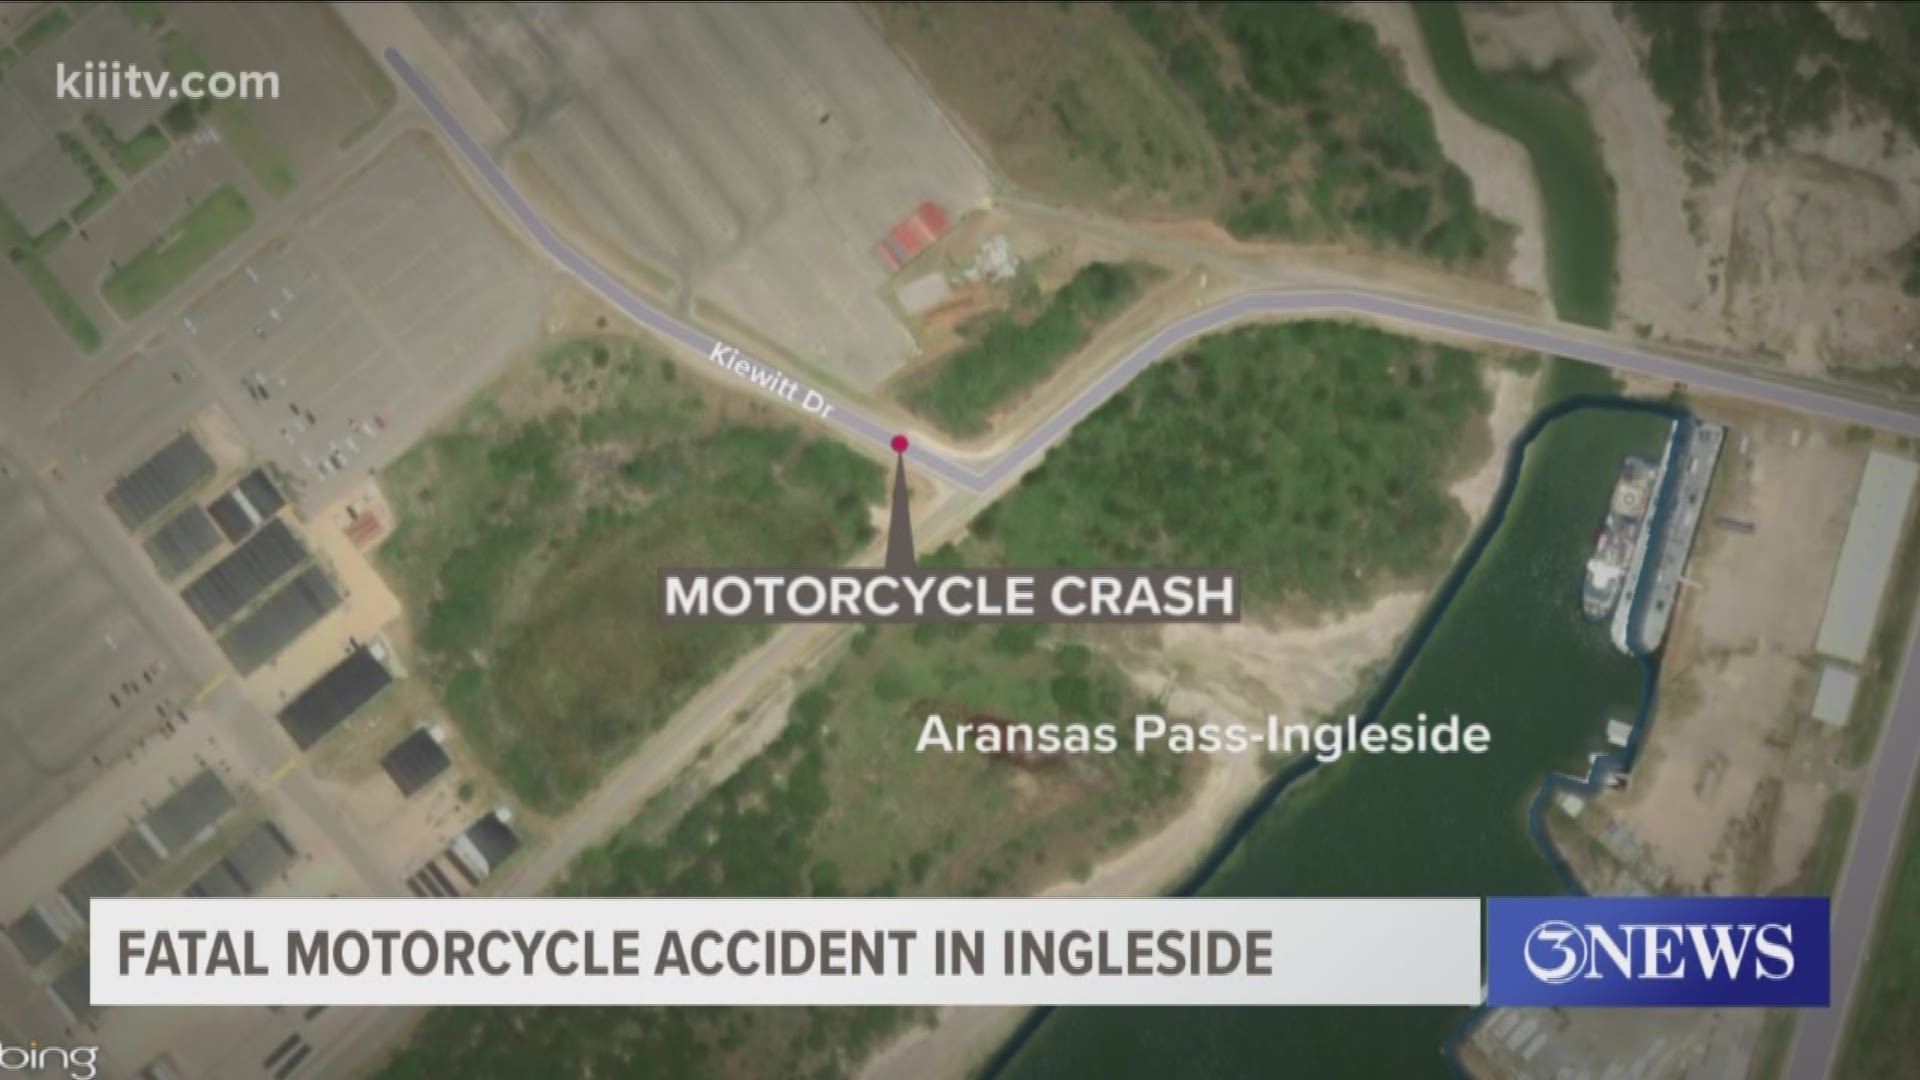 A fatal accident in Ingleside has claimed the life of a motorcyclist Friday night on Kiewit Drive near Belair Avenue.